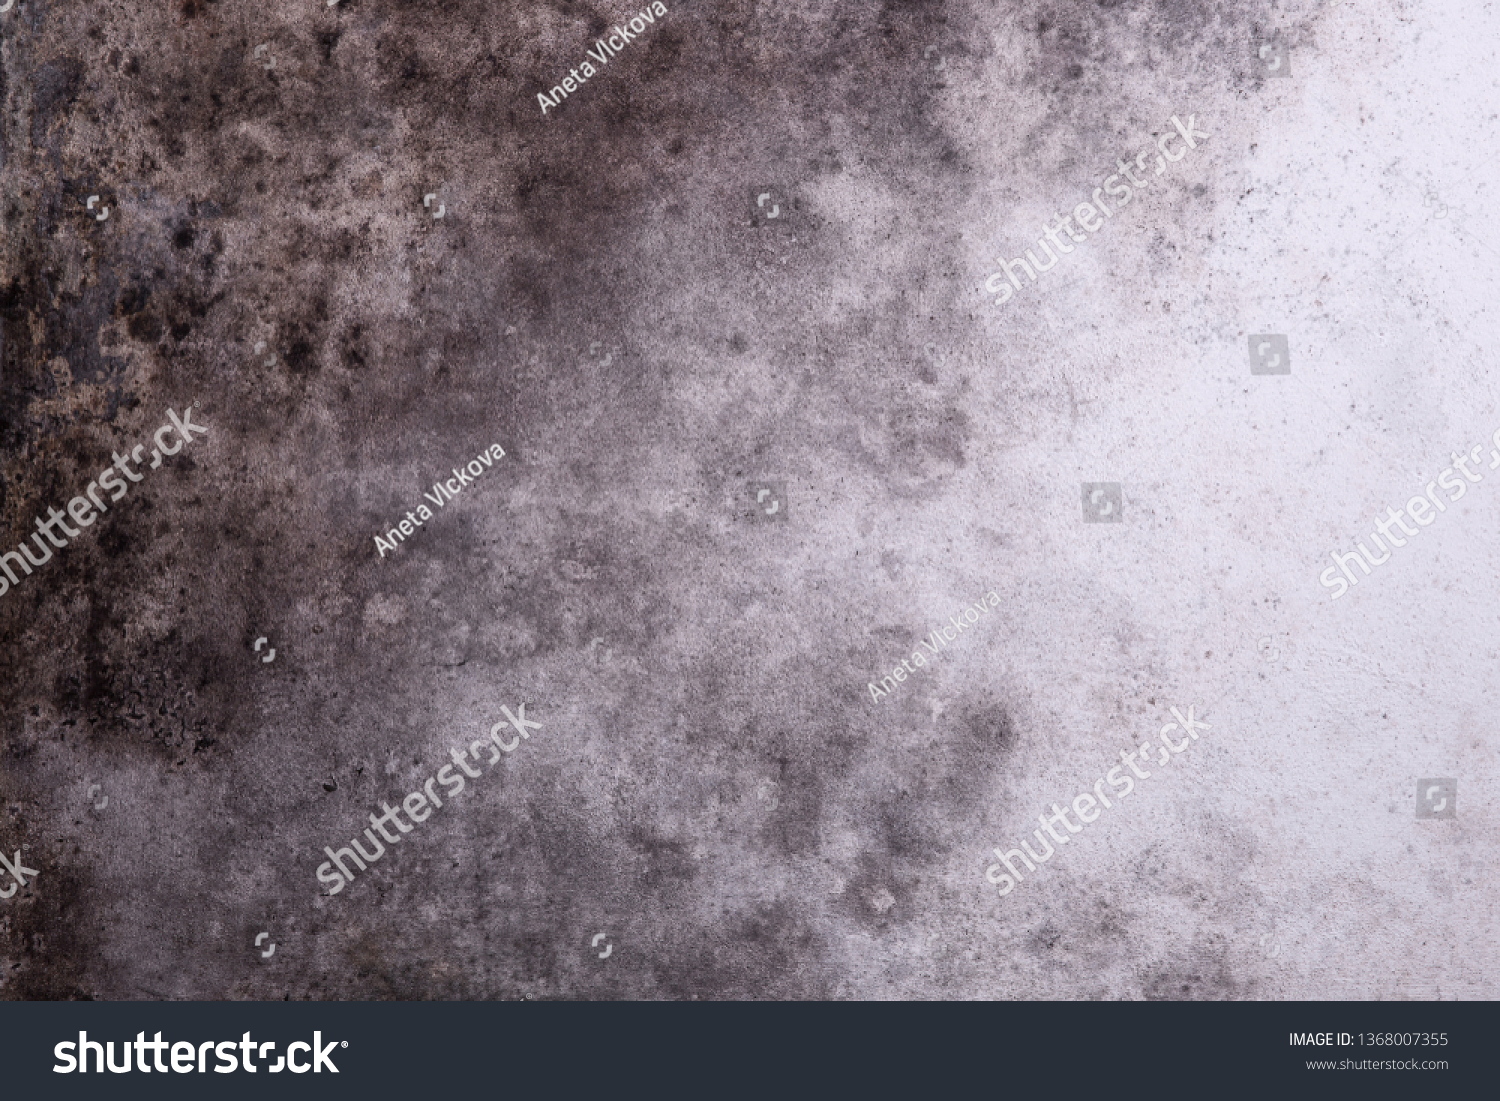 Gloomy grungy background with mold #1368007355